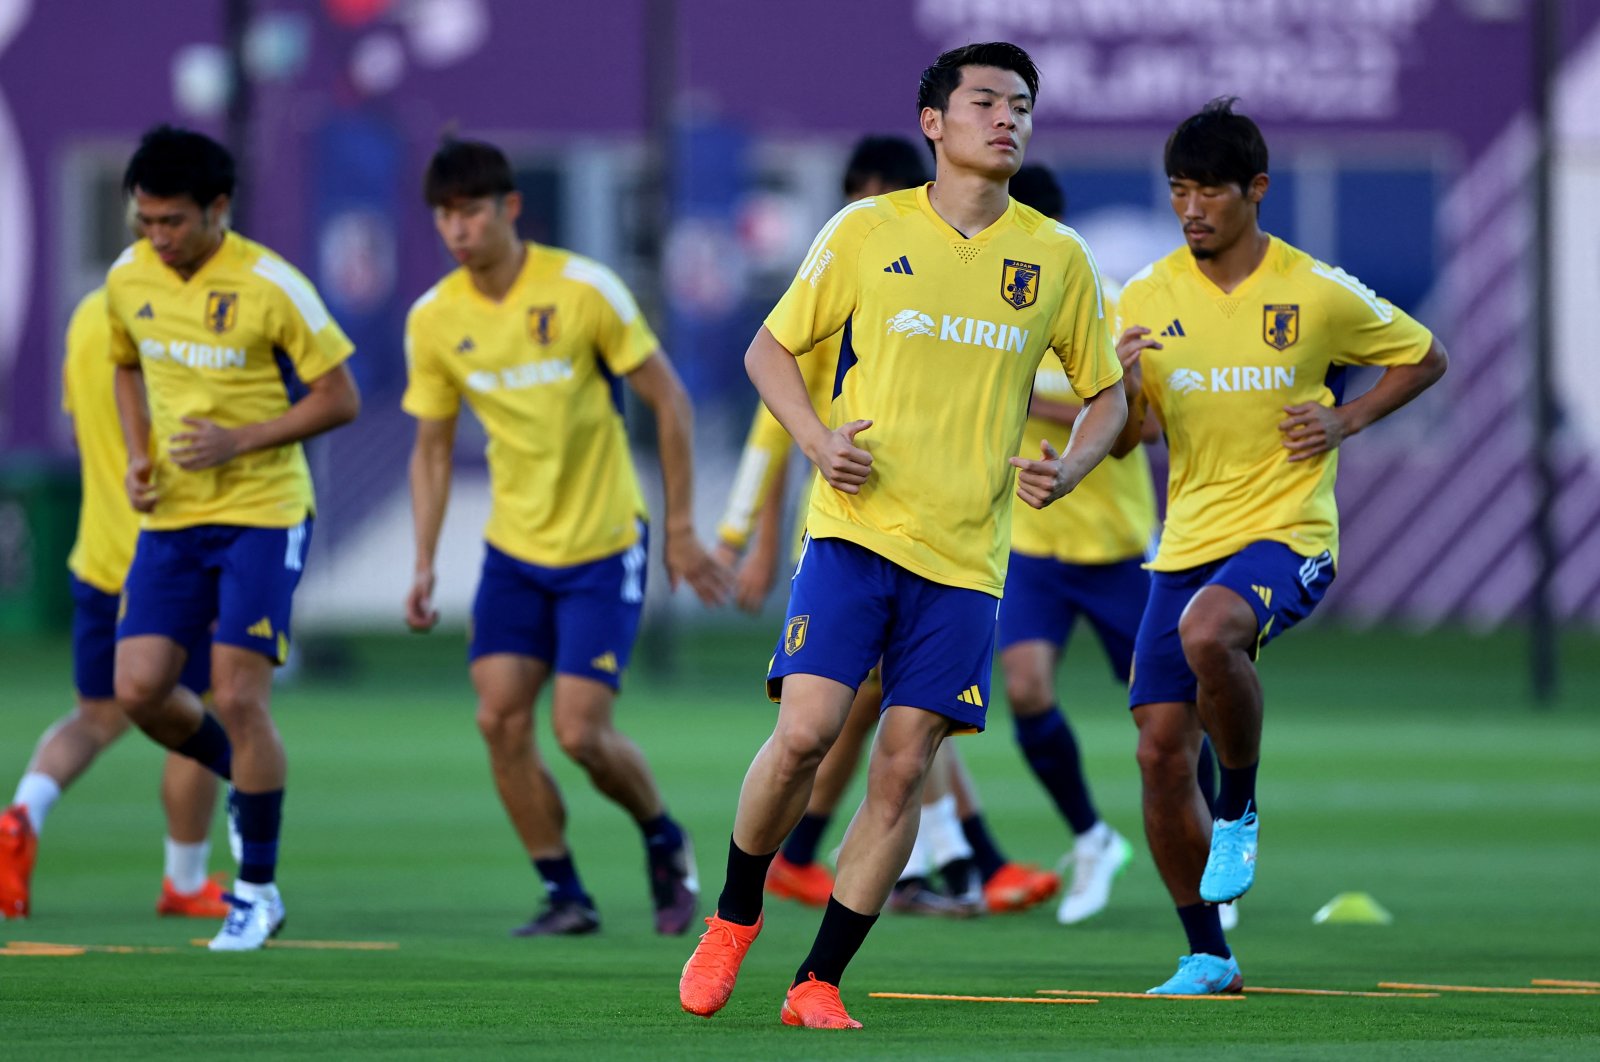 Japanese players attend a training session, Doha, Qatar, Dec. 3, 2022. (Reuters Photo)